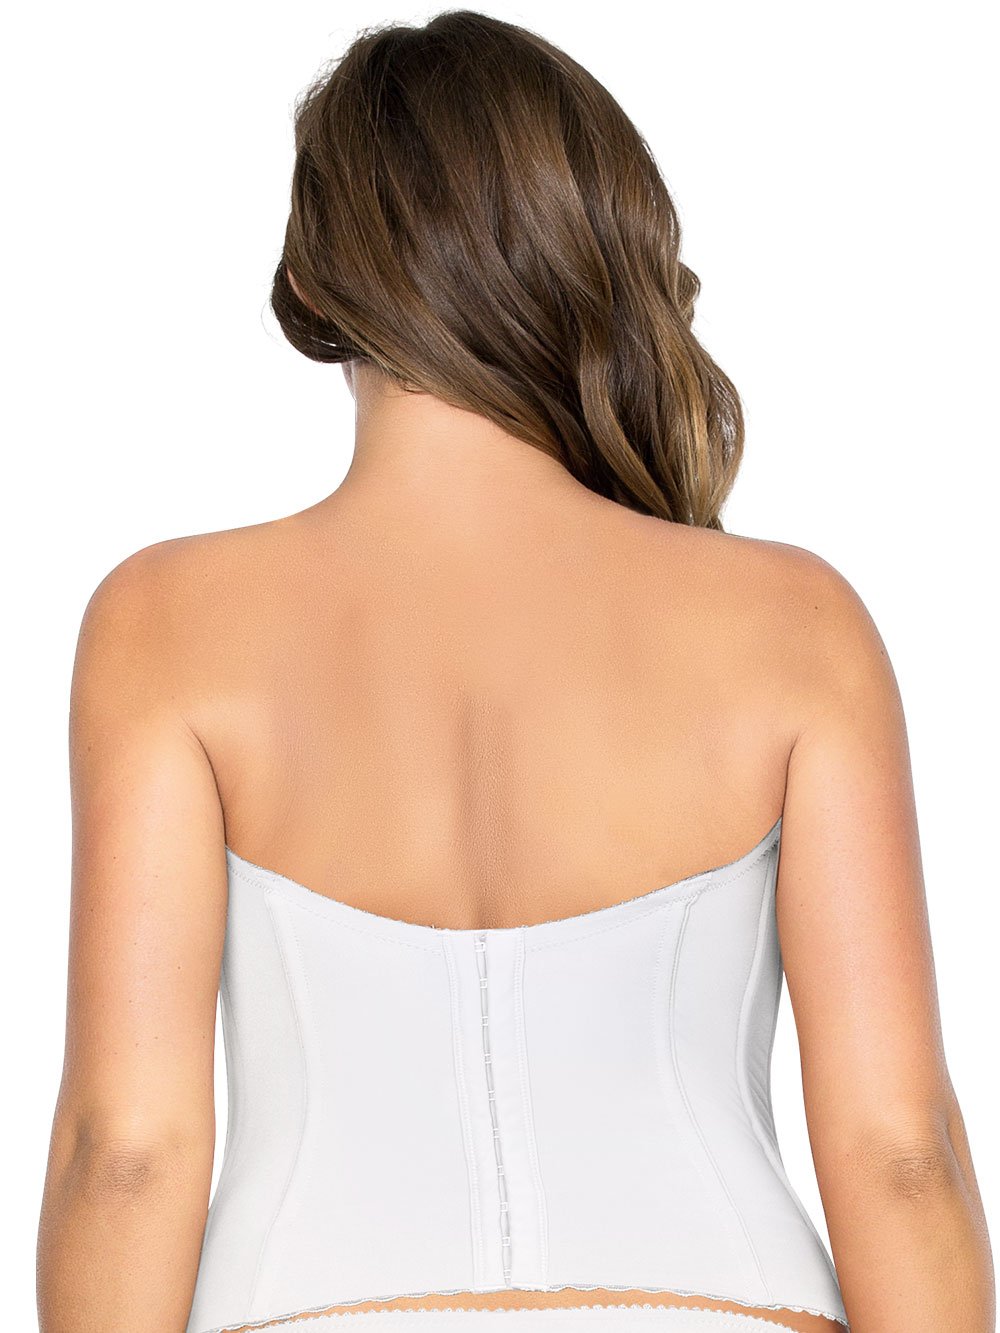 Dominique Lace Low Back Plunge Strapless Push Up Bustier Style 7759 - White